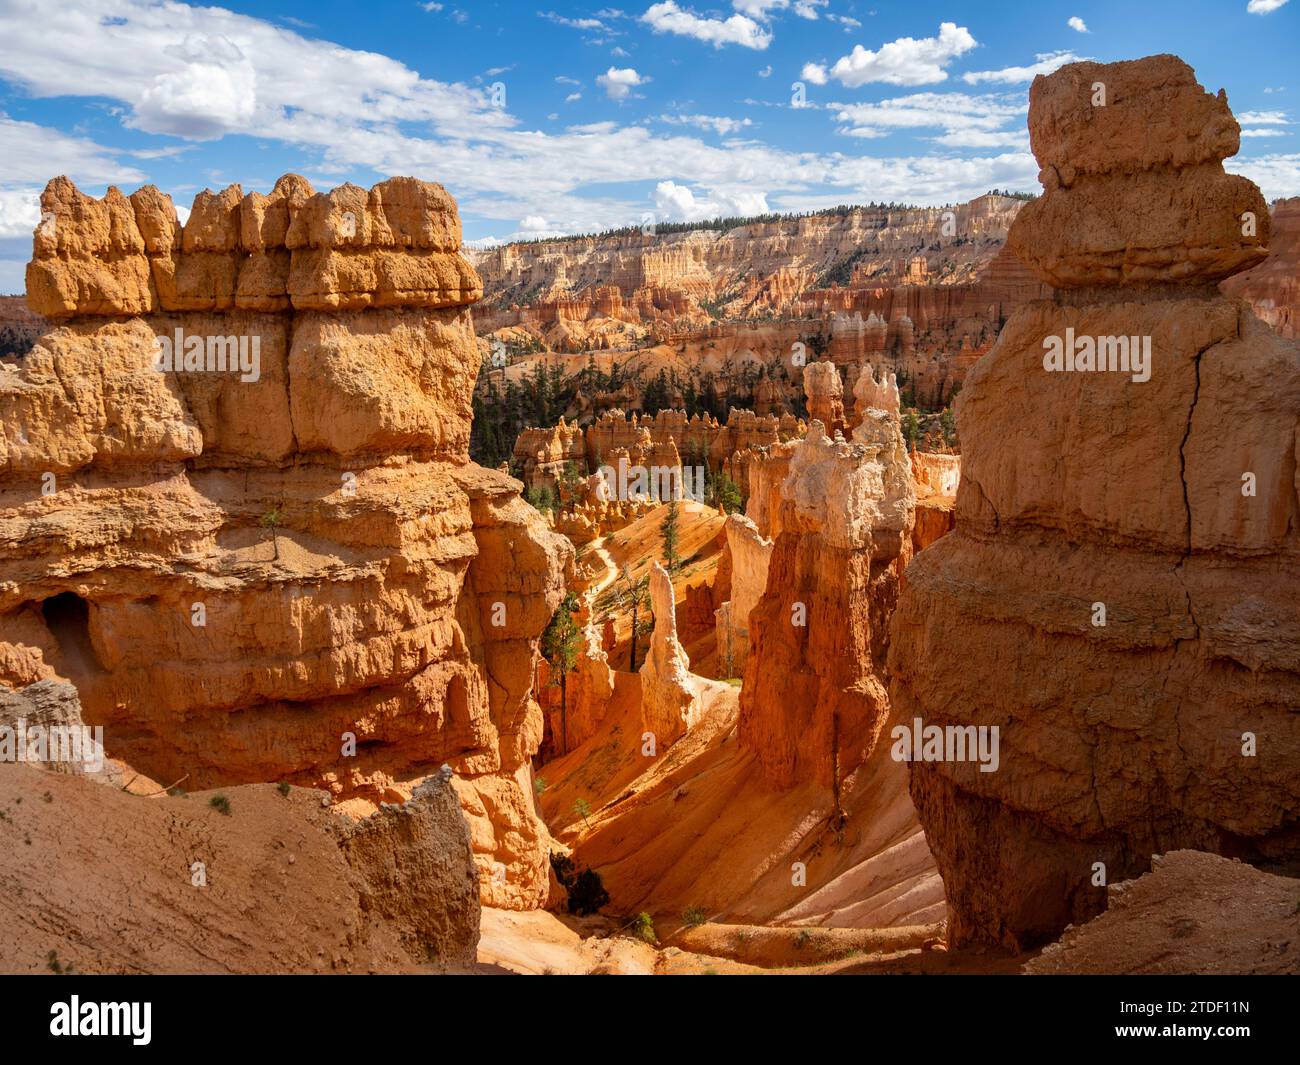 Red rock formations known as hoodoos in Bryce Canyon National Park, Utah, United States of America, North America Stock Photo